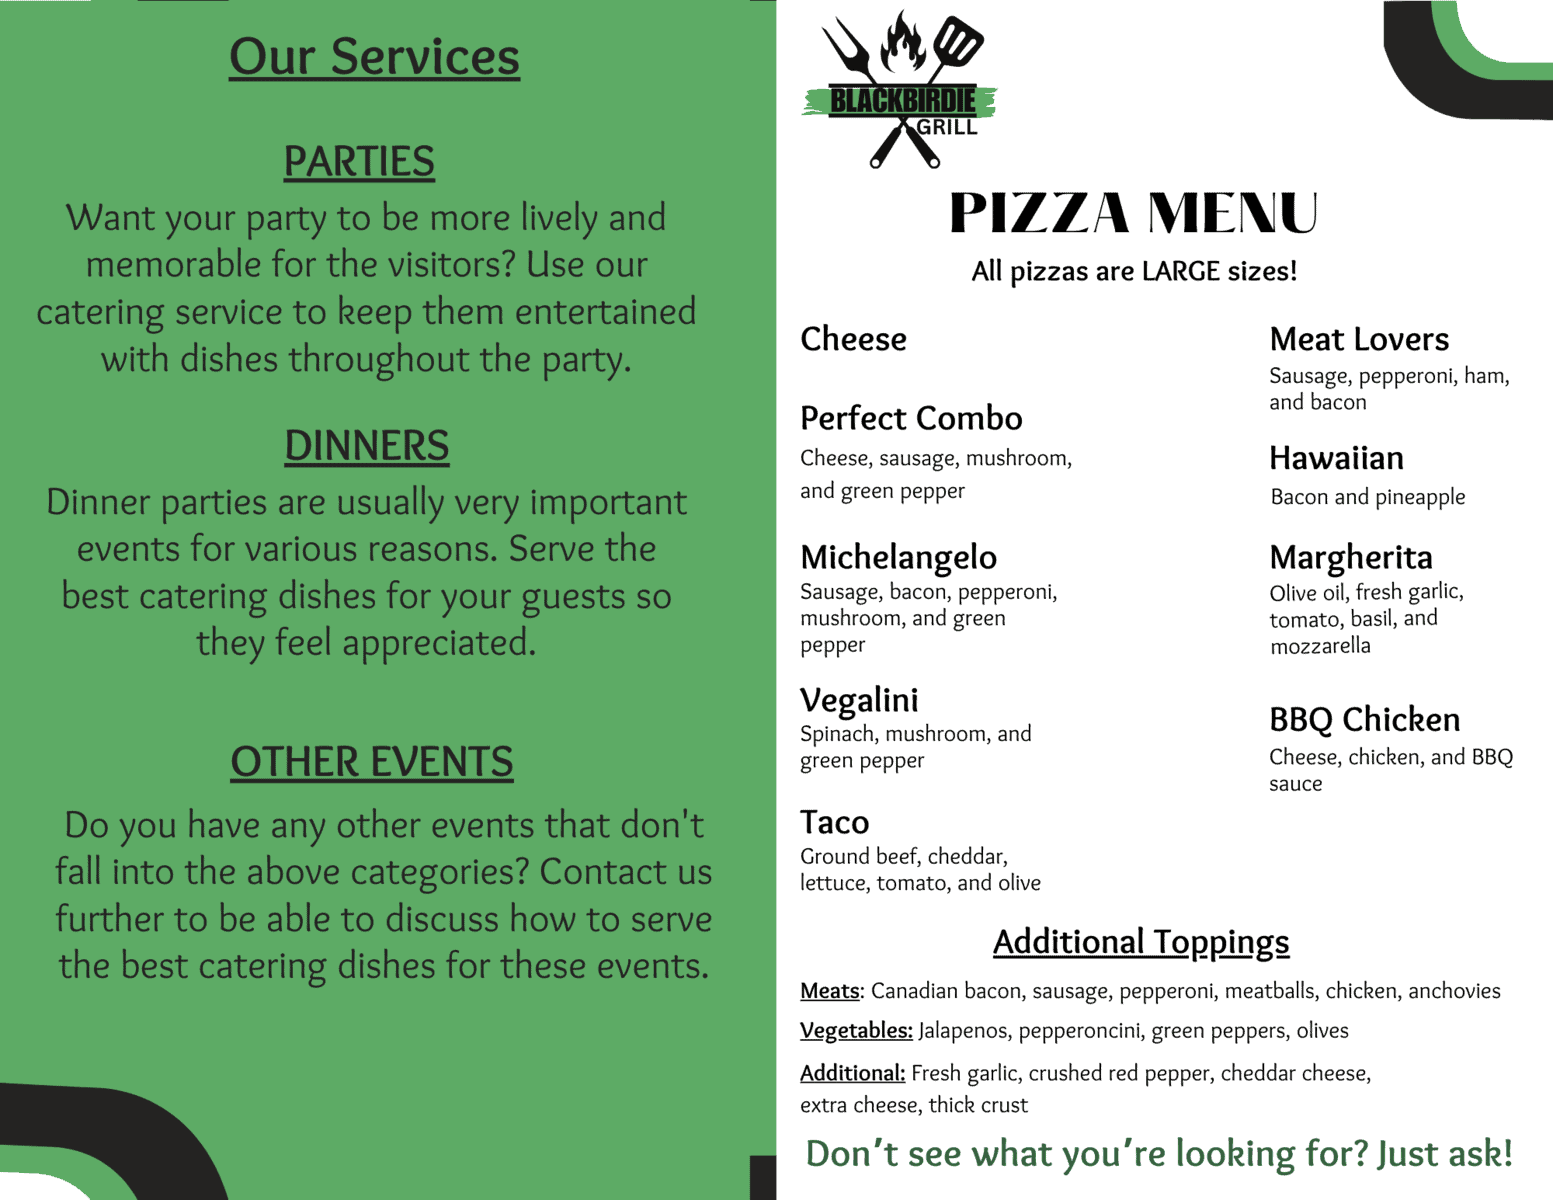 our services and pizza menu (2)